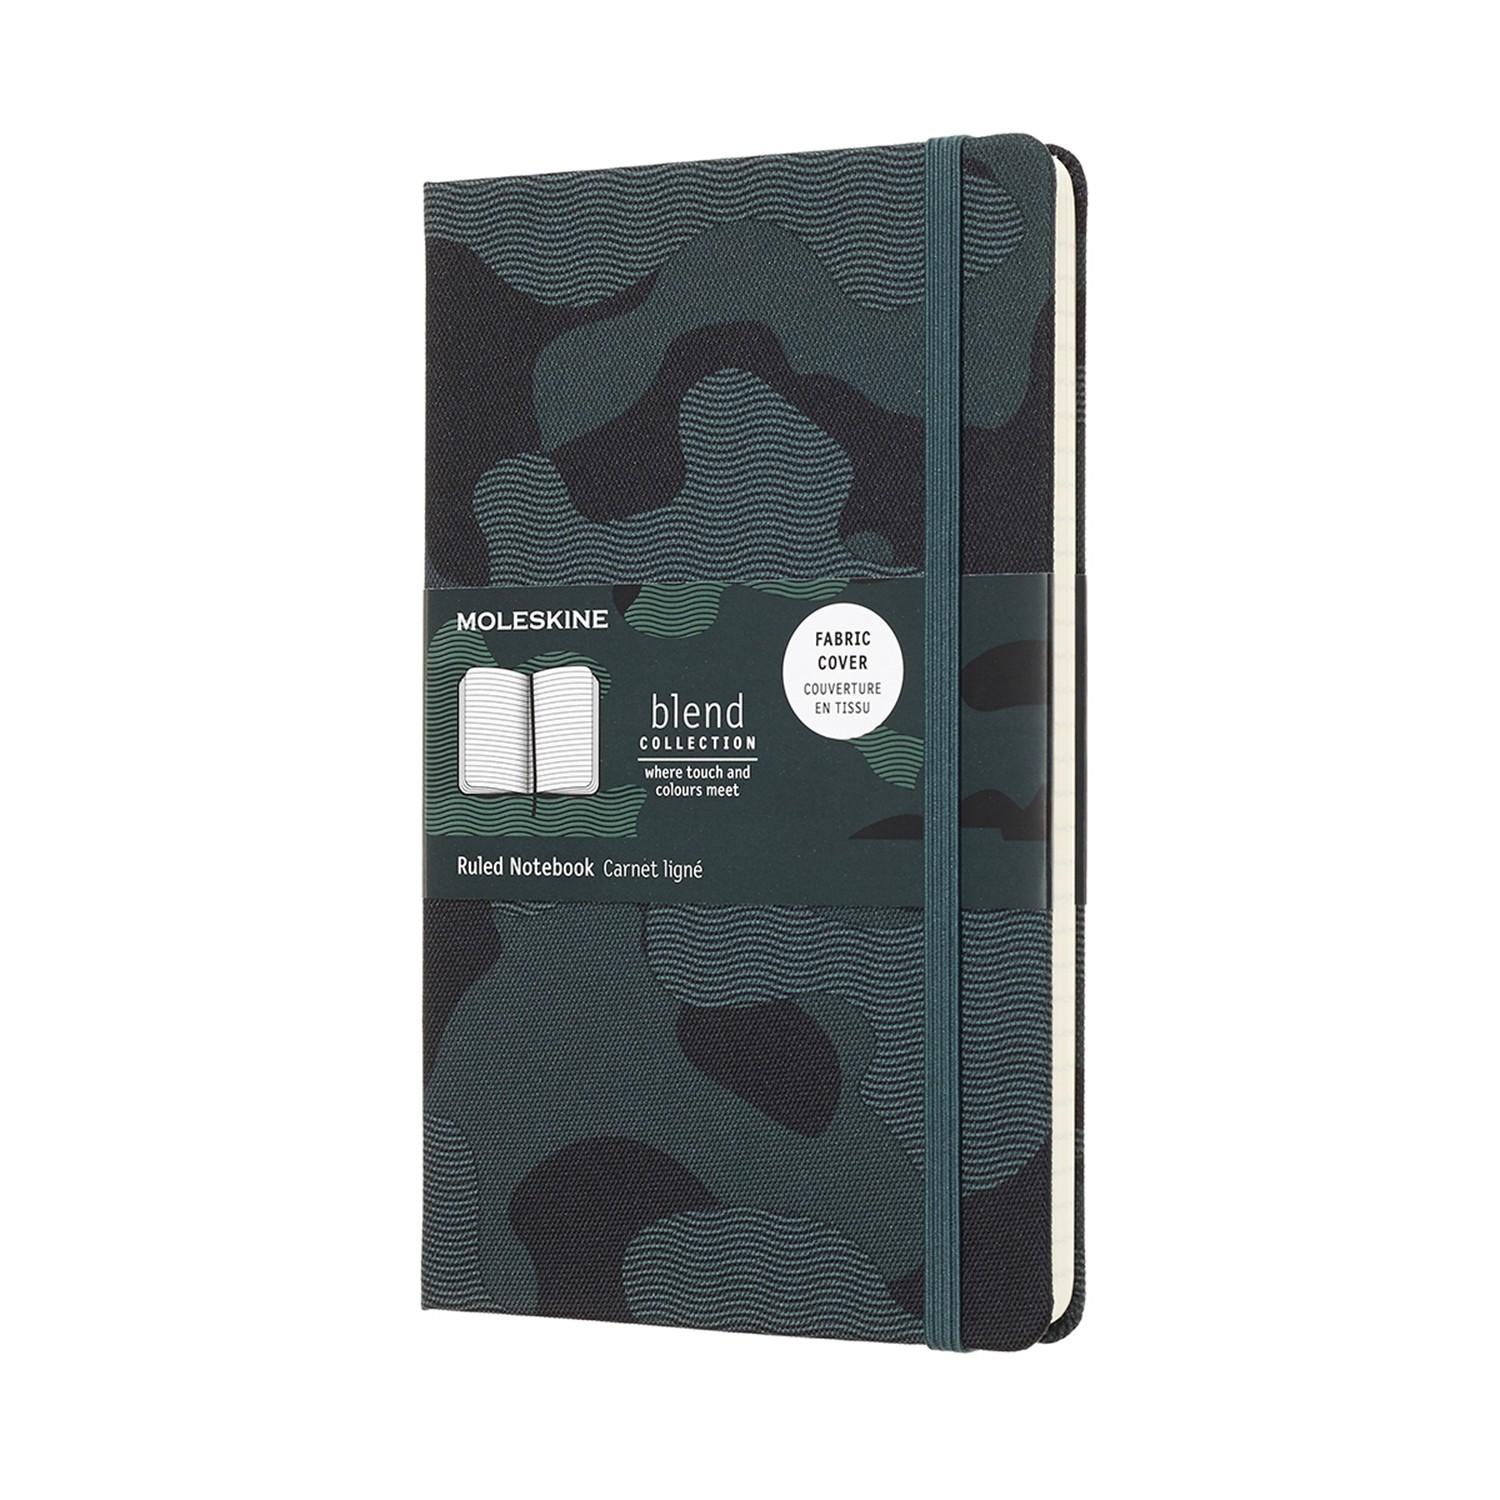 Moleskine Limited Collection Notebook Blend 18 LarGE RULED GAMOUFLAGE GREEN